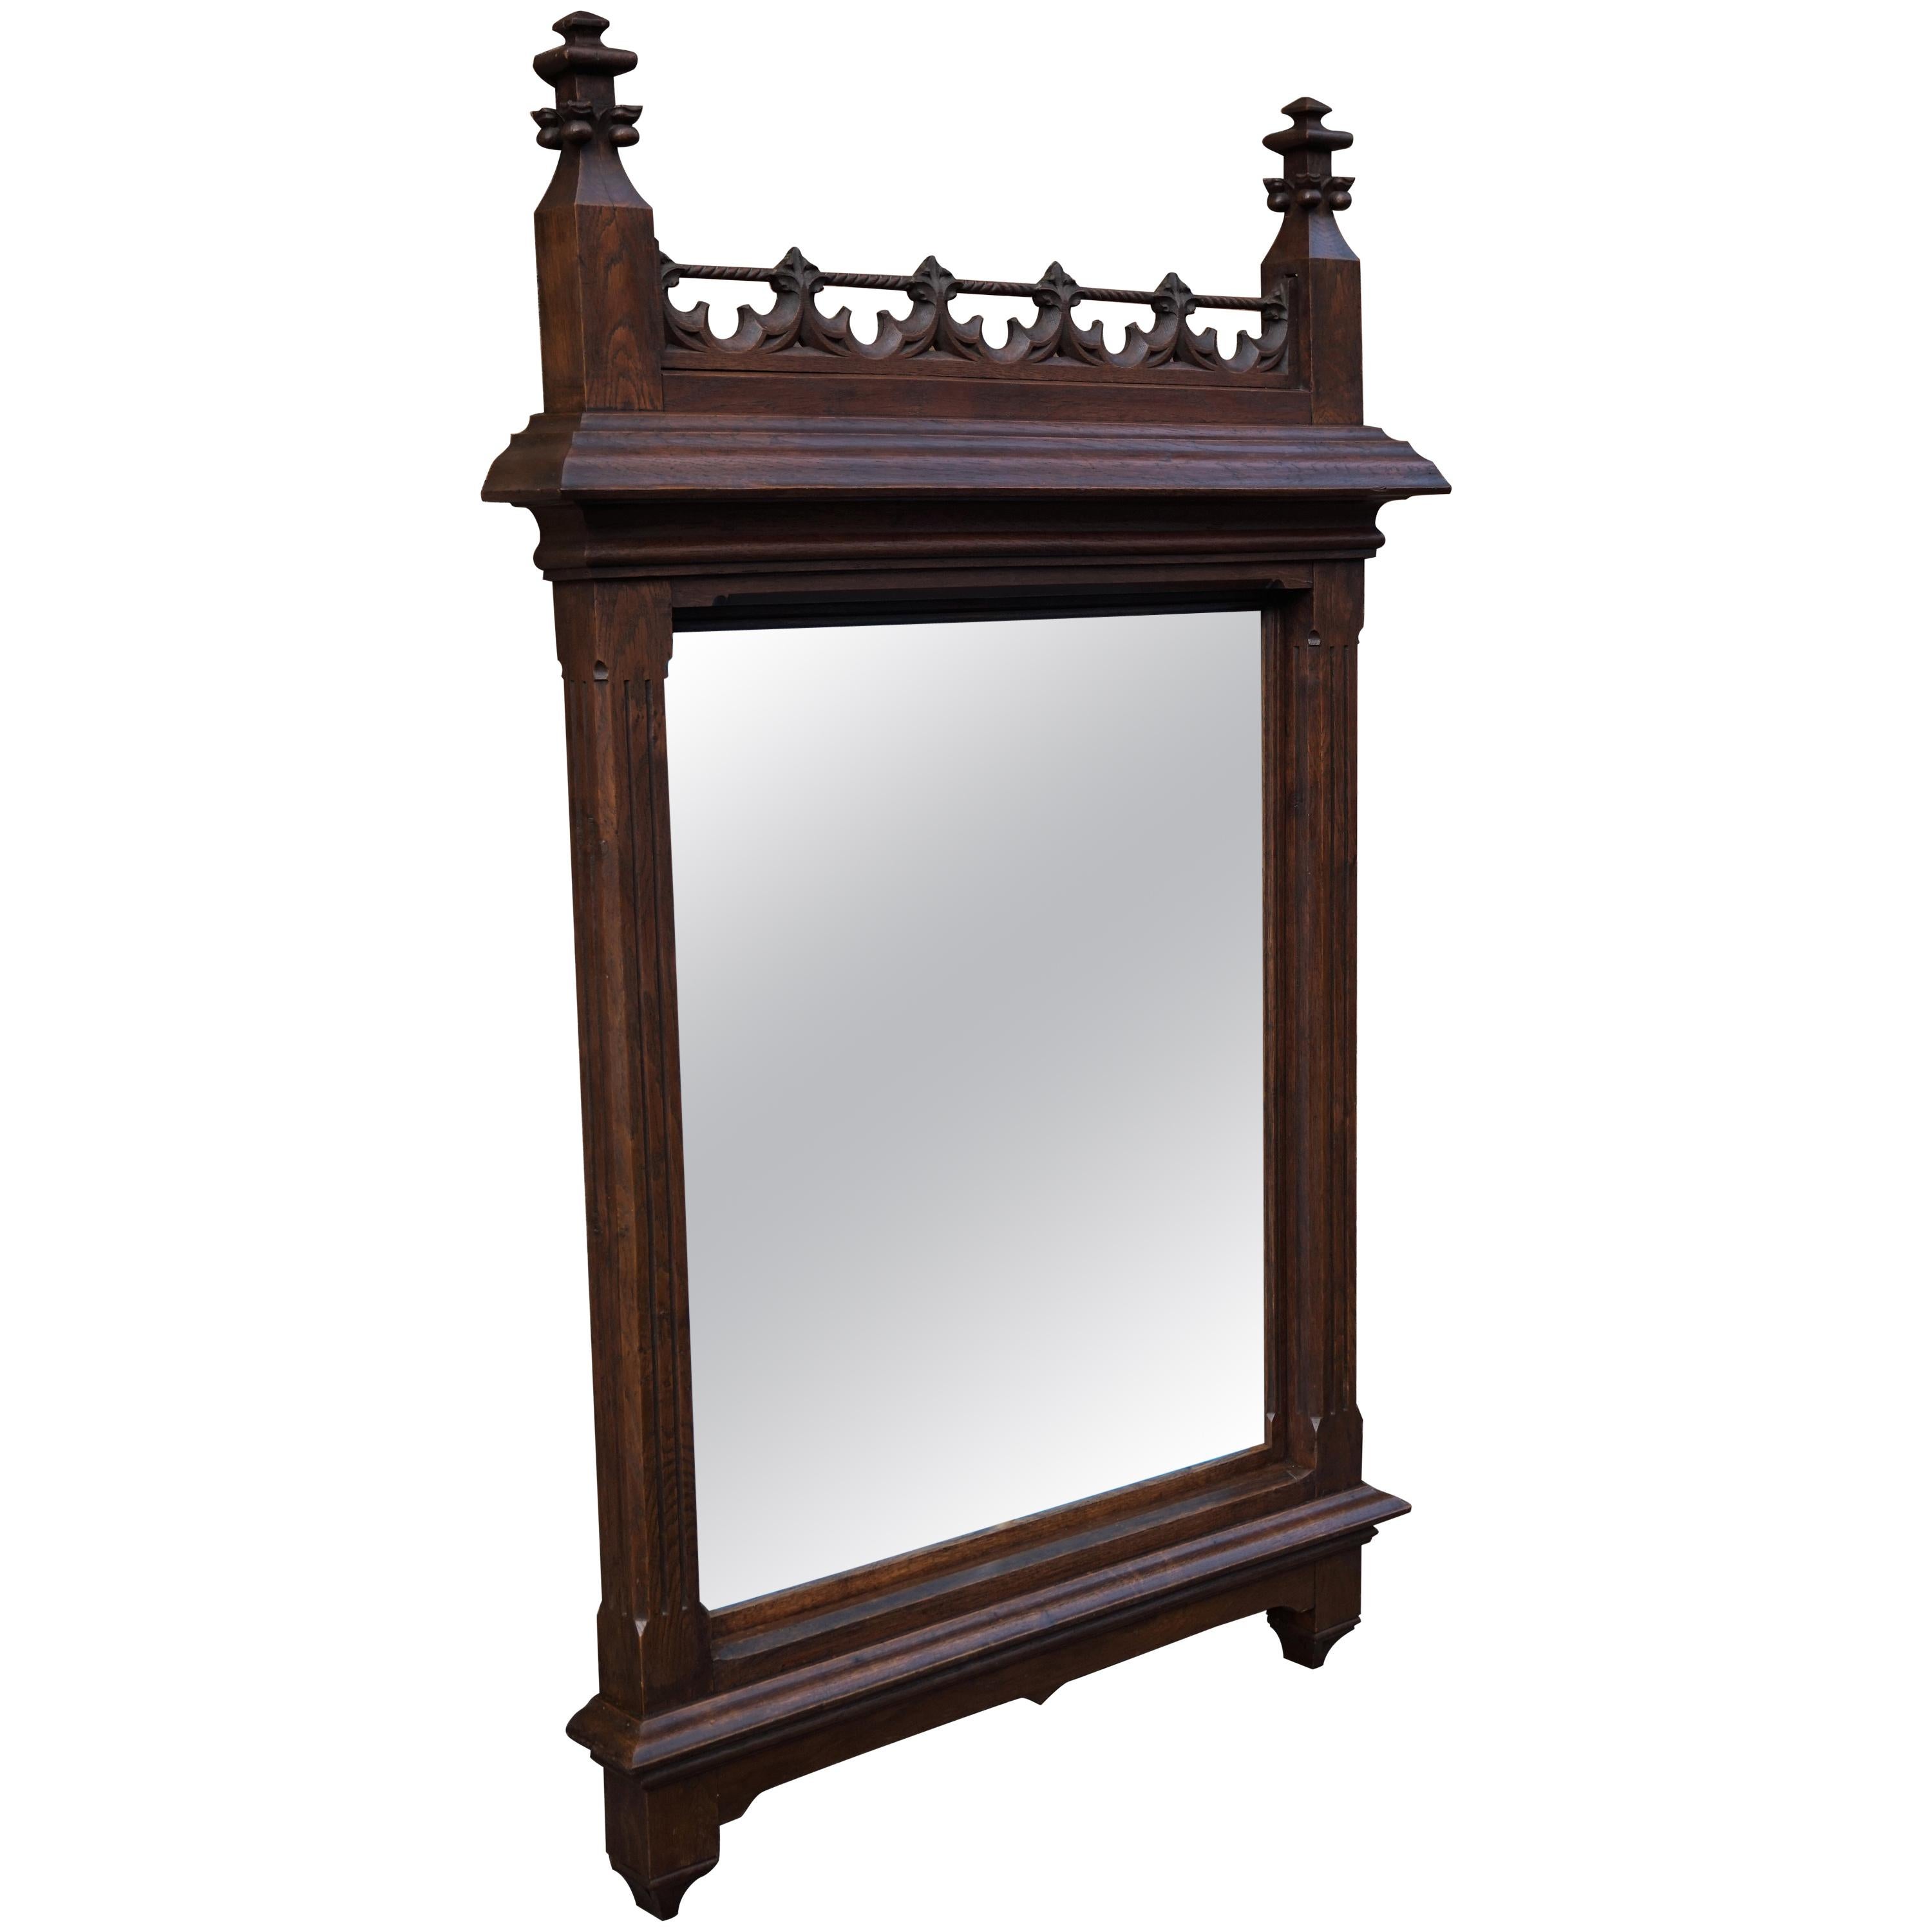 Large and Stunning 19th Century Hand Carved Gothic Revival Wall & Mantel Mirror